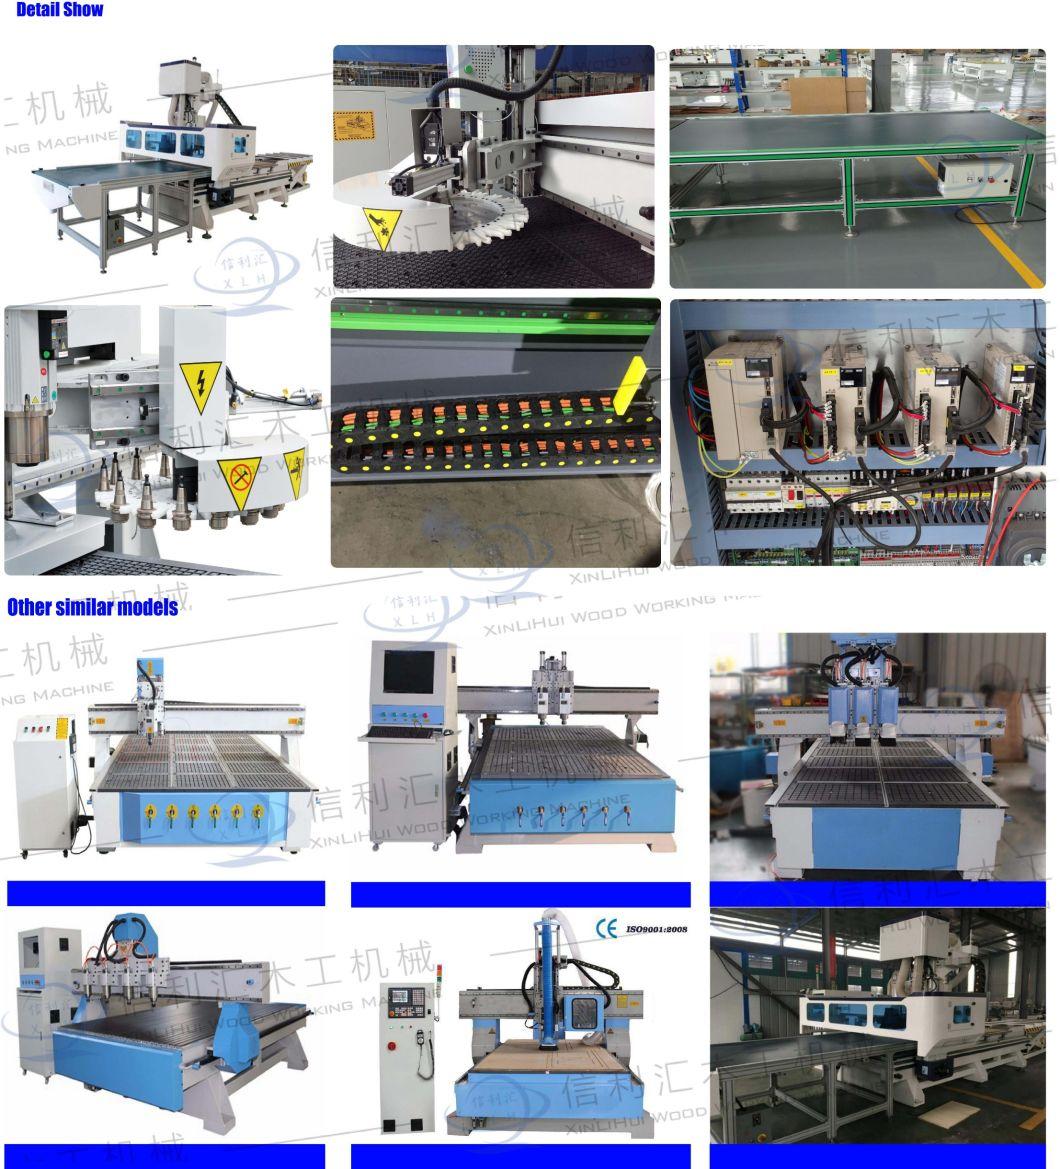 Canada Router Machinewood Carving Machine, CNC Machines Wood Works, CNC Machines All, , CNC Machines All Wood Works, , CNC Woodworking Machine